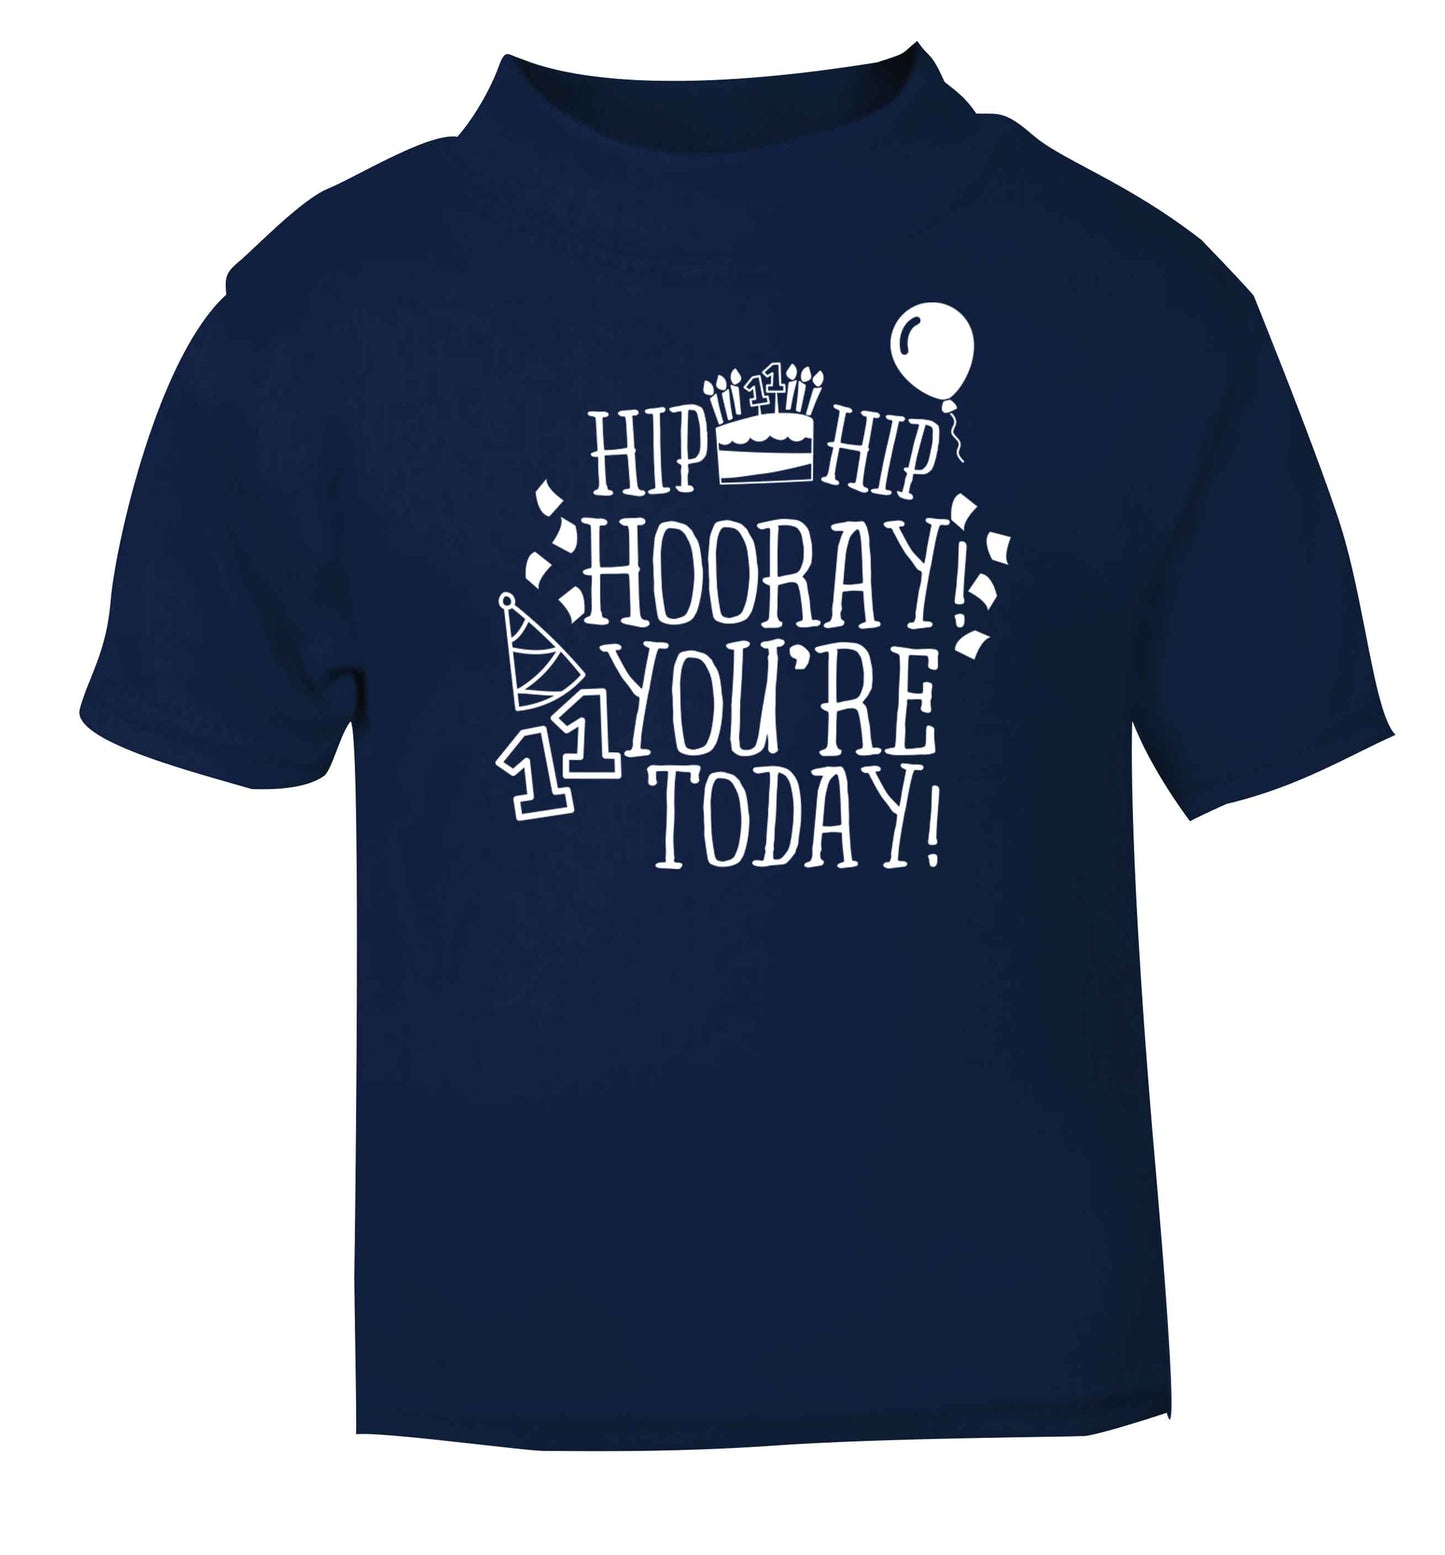 Hip hip hooray I you're eleven today! navy baby toddler Tshirt 2 Years